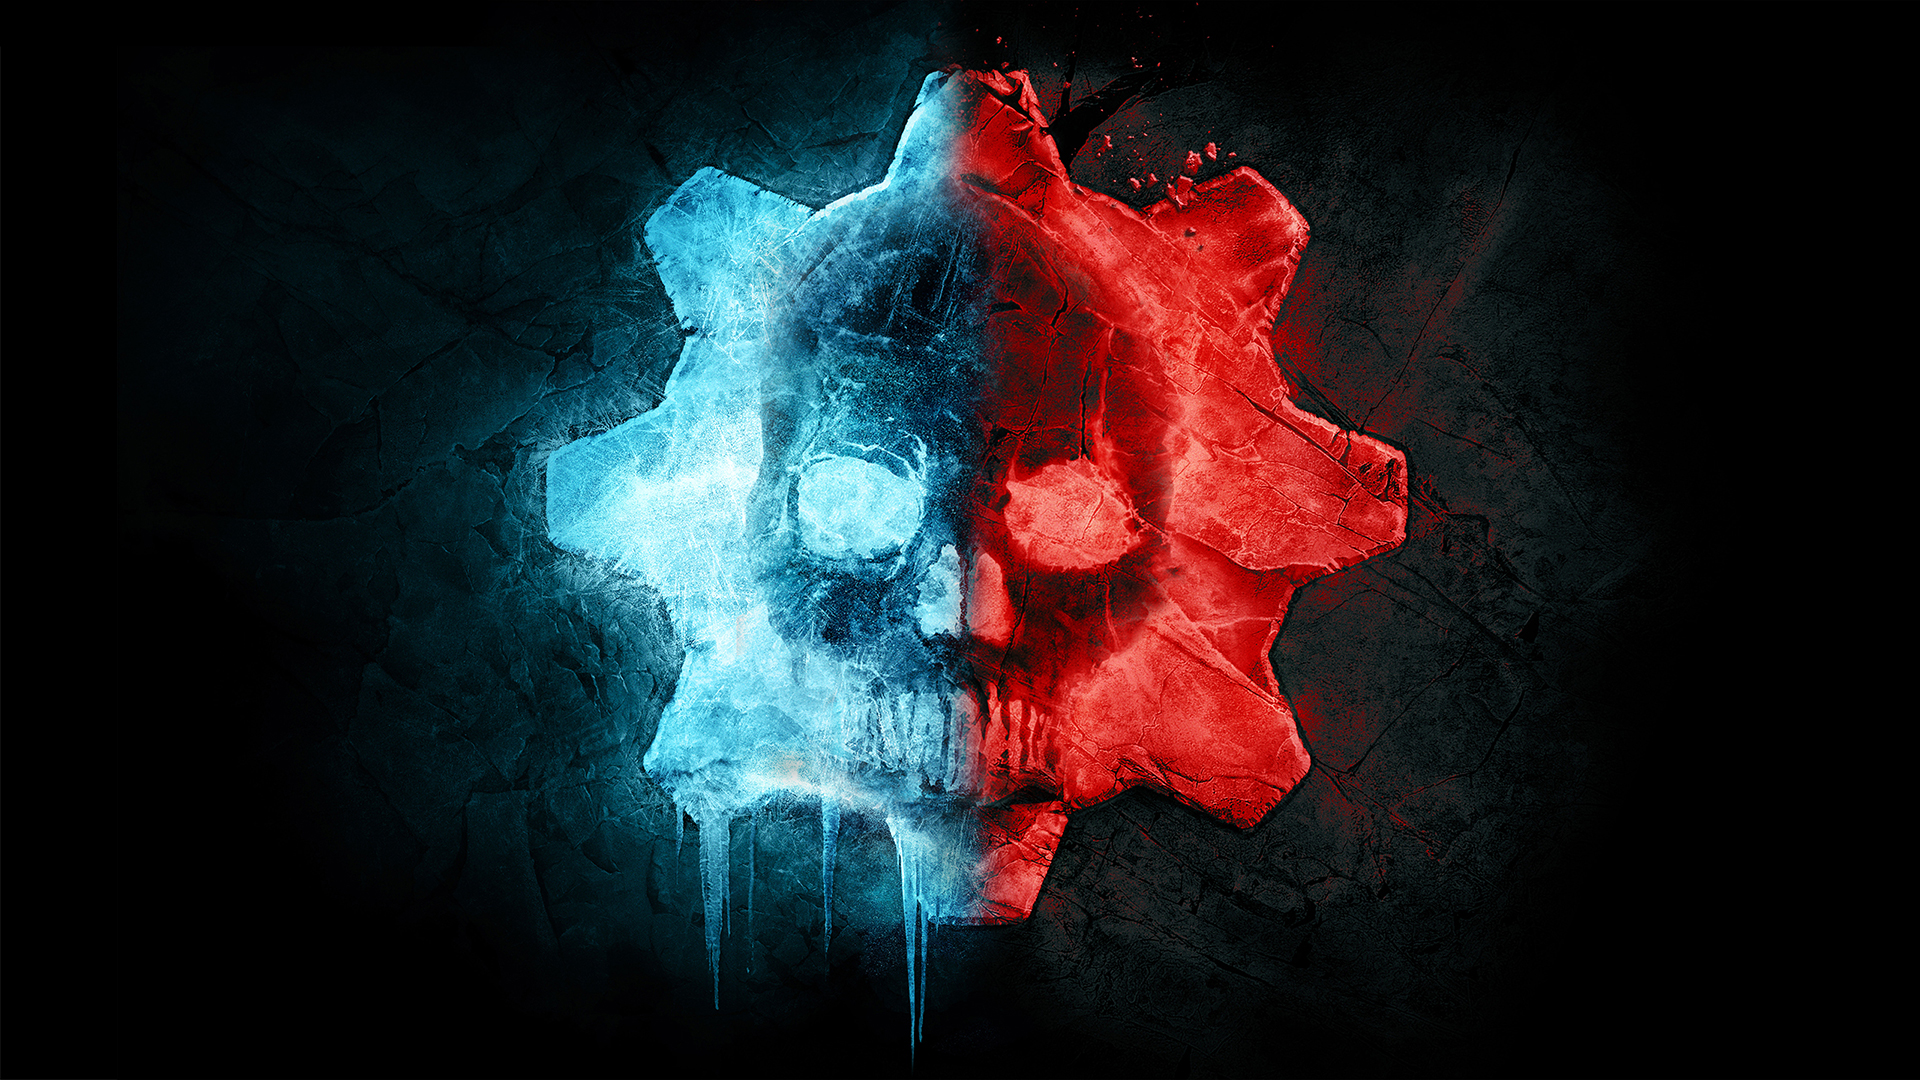 Gears 5 Desktop and Xbox Backgrounds - General Discussion - Gears Forums